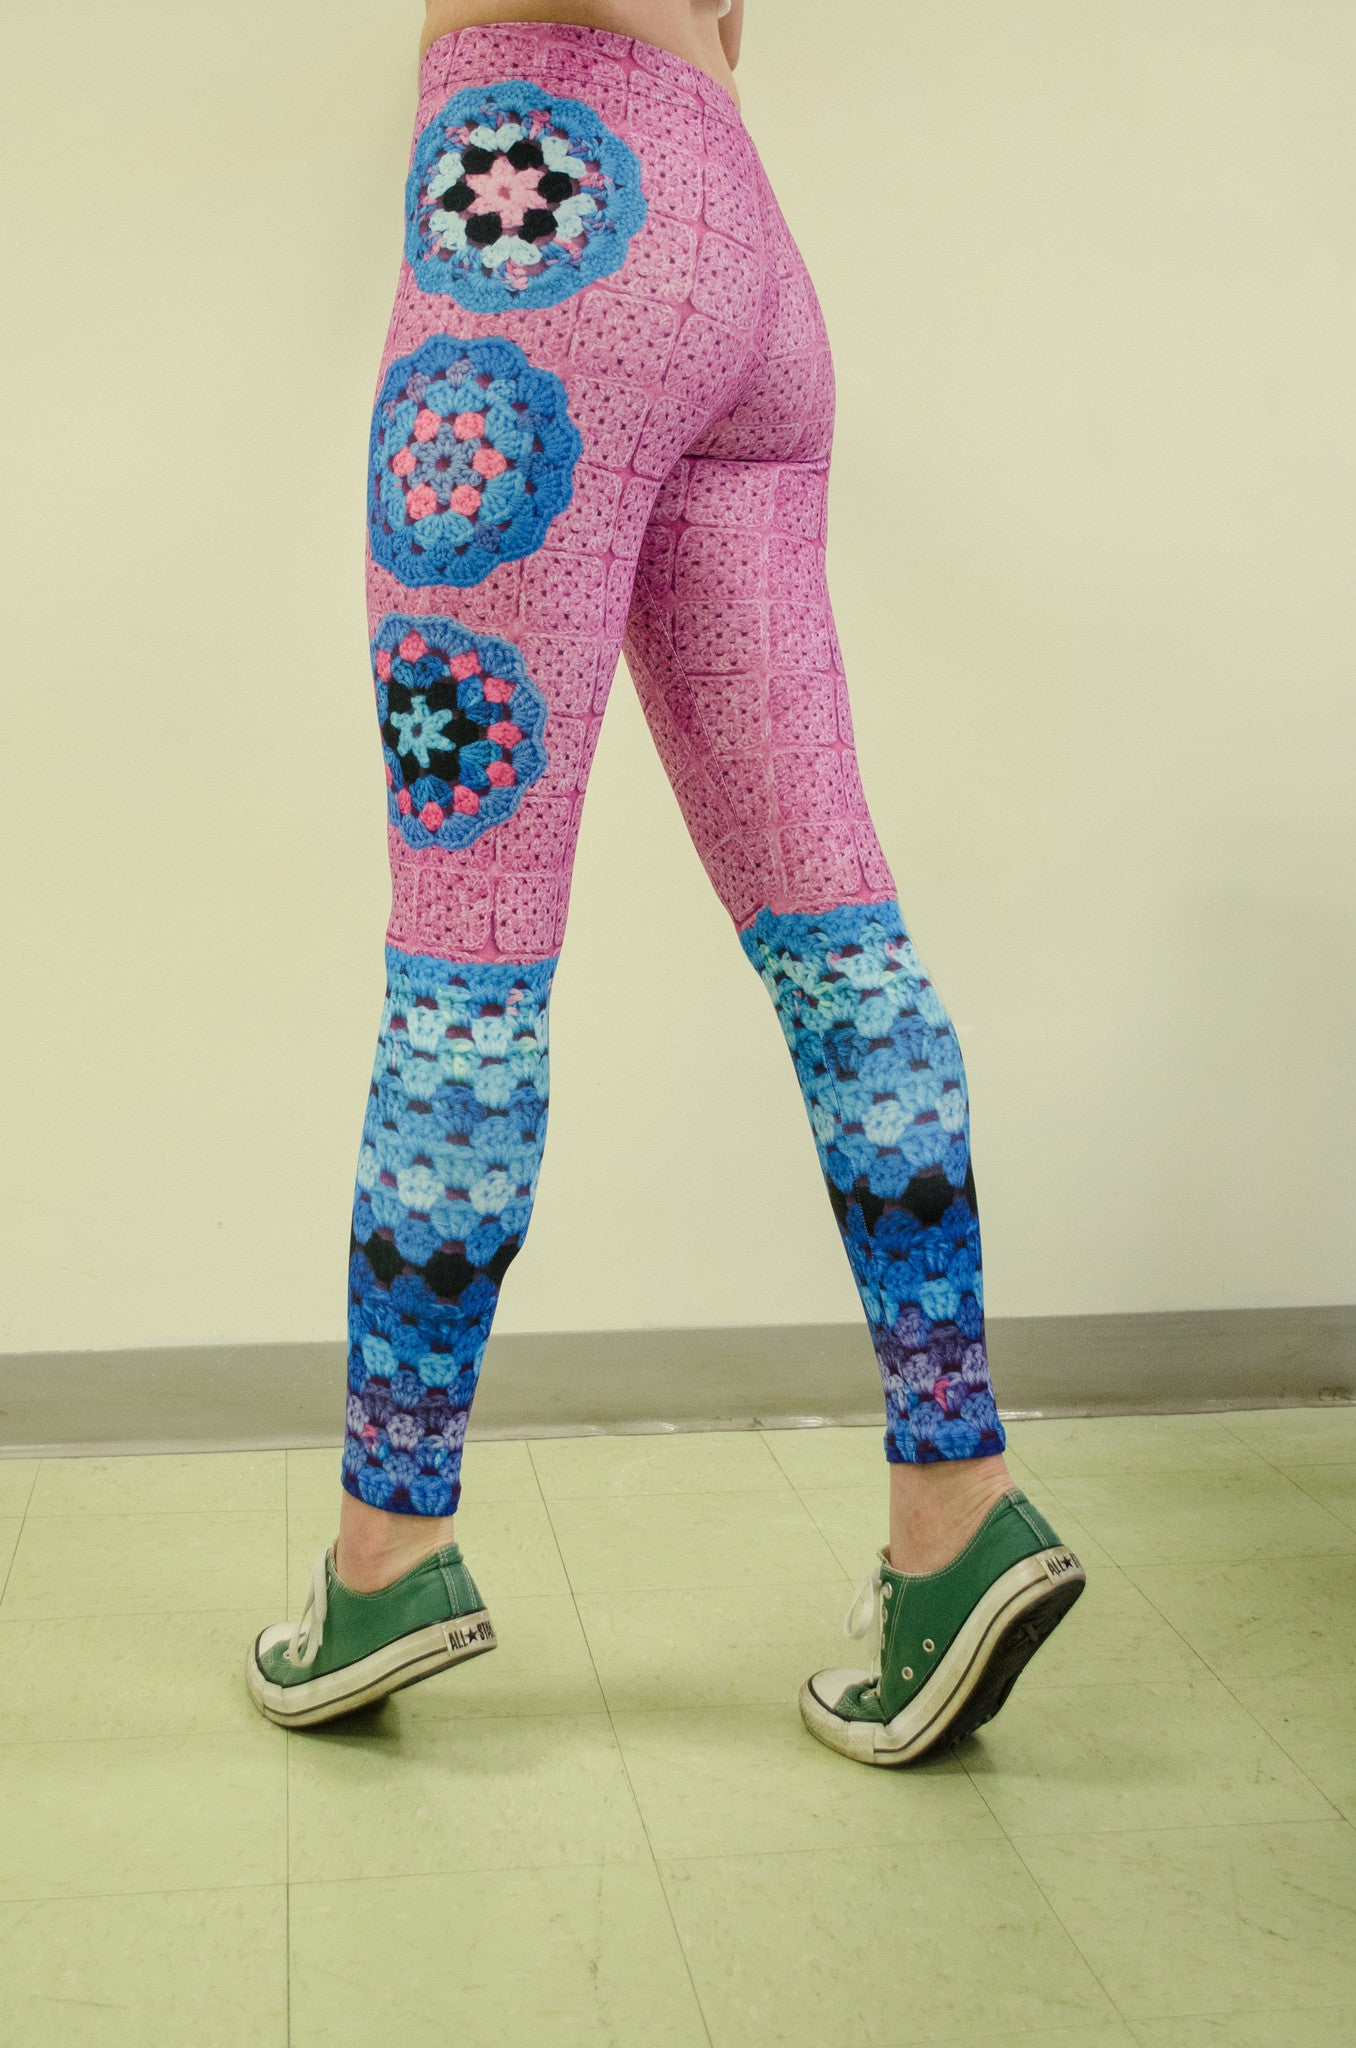 Snapdragon Brand Clothing Granny Square Crochet Print pink and turquoise leggings in style Mermaid Queen features a 1960s vintage boho feel and an ocean of colors. Made of comfortable spandex.